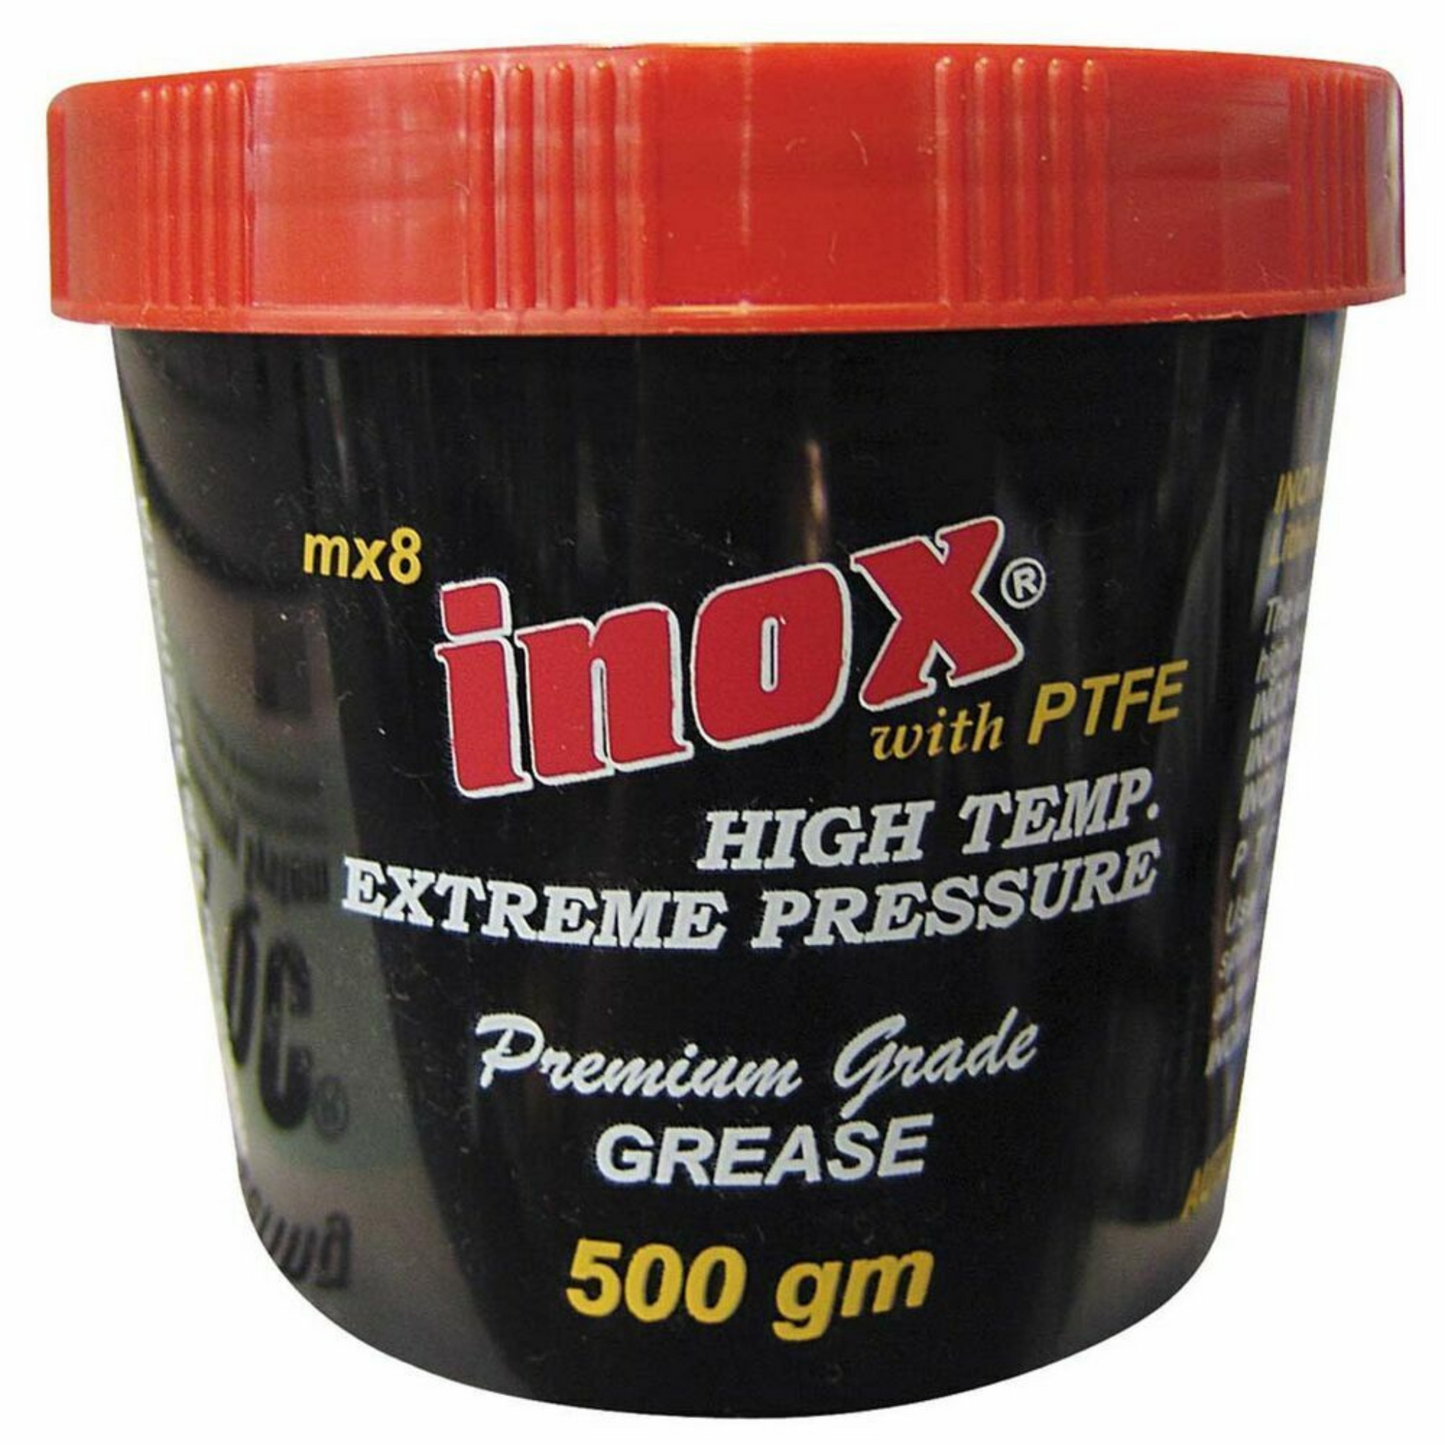 INOX MX8 Extreme Pressure Grease with PTFE - 500g